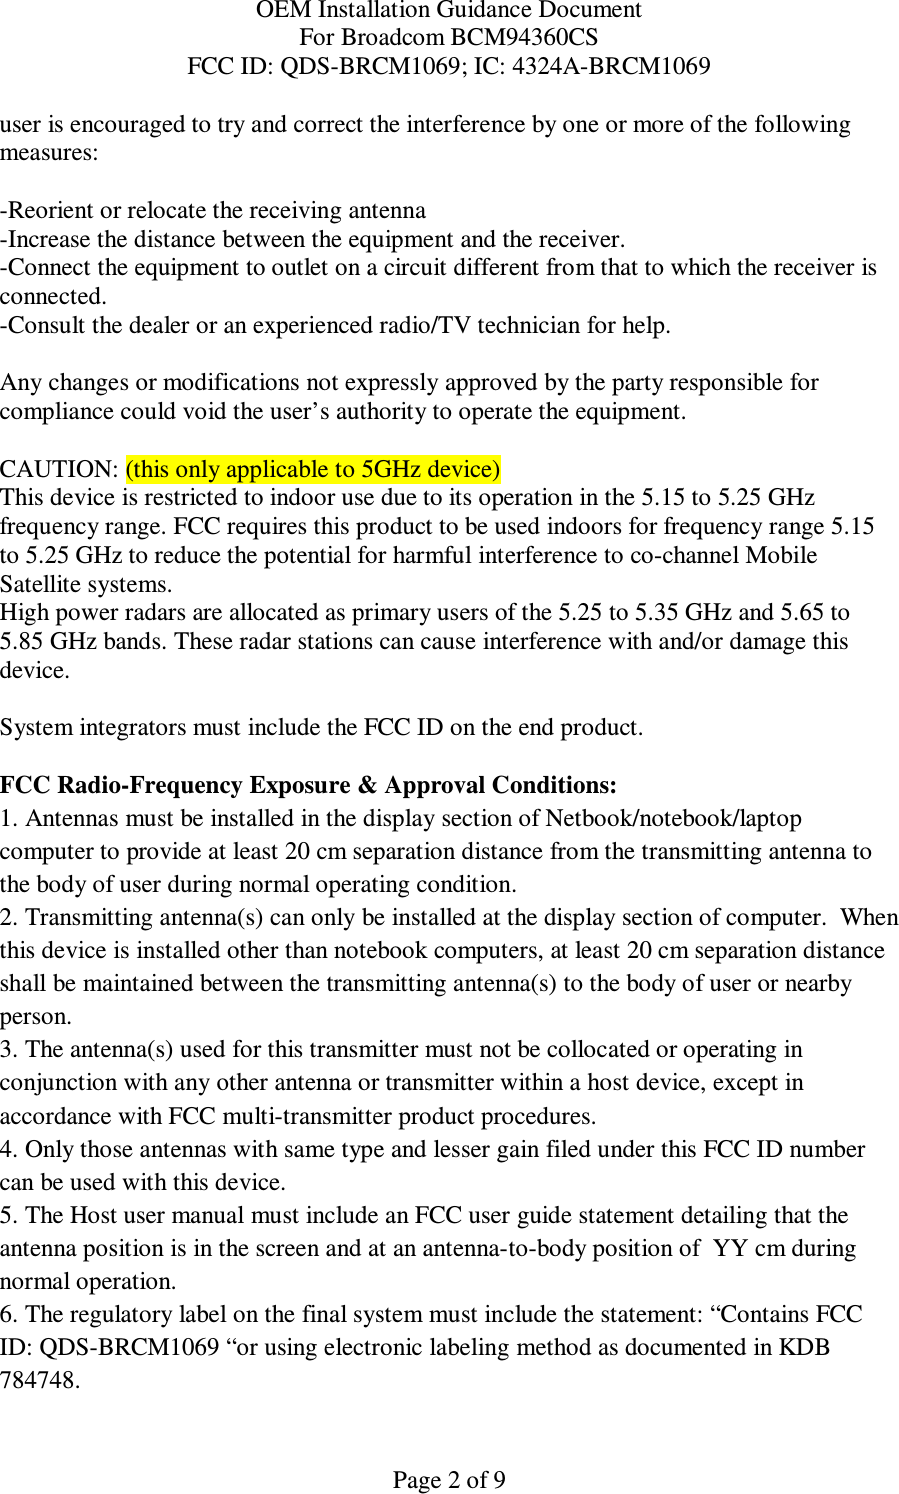 OEM Installation Guidance Document For Broadcom BCM94360CS FCC ID: QDS-BRCM1069; IC: 4324A-BRCM1069  Page 2 of 9 user is encouraged to try and correct the interference by one or more of the following measures:    -Reorient or relocate the receiving antenna -Increase the distance between the equipment and the receiver. -Connect the equipment to outlet on a circuit different from that to which the receiver is connected. -Consult the dealer or an experienced radio/TV technician for help.  Any changes or modifications not expressly approved by the party responsible for compliance could void the user’s authority to operate the equipment.  CAUTION: (this only applicable to 5GHz device) This device is restricted to indoor use due to its operation in the 5.15 to 5.25 GHz frequency range. FCC requires this product to be used indoors for frequency range 5.15 to 5.25 GHz to reduce the potential for harmful interference to co-channel Mobile Satellite systems. High power radars are allocated as primary users of the 5.25 to 5.35 GHz and 5.65 to 5.85 GHz bands. These radar stations can cause interference with and/or damage this device.  System integrators must include the FCC ID on the end product.   FCC Radio-Frequency Exposure &amp; Approval Conditions: 1. Antennas must be installed in the display section of Netbook/notebook/laptop computer to provide at least 20 cm separation distance from the transmitting antenna to the body of user during normal operating condition. 2. Transmitting antenna(s) can only be installed at the display section of computer.  When this device is installed other than notebook computers, at least 20 cm separation distance shall be maintained between the transmitting antenna(s) to the body of user or nearby person. 3. The antenna(s) used for this transmitter must not be collocated or operating in conjunction with any other antenna or transmitter within a host device, except in accordance with FCC multi-transmitter product procedures. 4. Only those antennas with same type and lesser gain filed under this FCC ID number can be used with this device. 5. The Host user manual must include an FCC user guide statement detailing that the antenna position is in the screen and at an antenna-to-body position of  YY cm during normal operation. 6. The regulatory label on the final system must include the statement: “Contains FCC ID: QDS-BRCM1069 “or using electronic labeling method as documented in KDB 784748. 